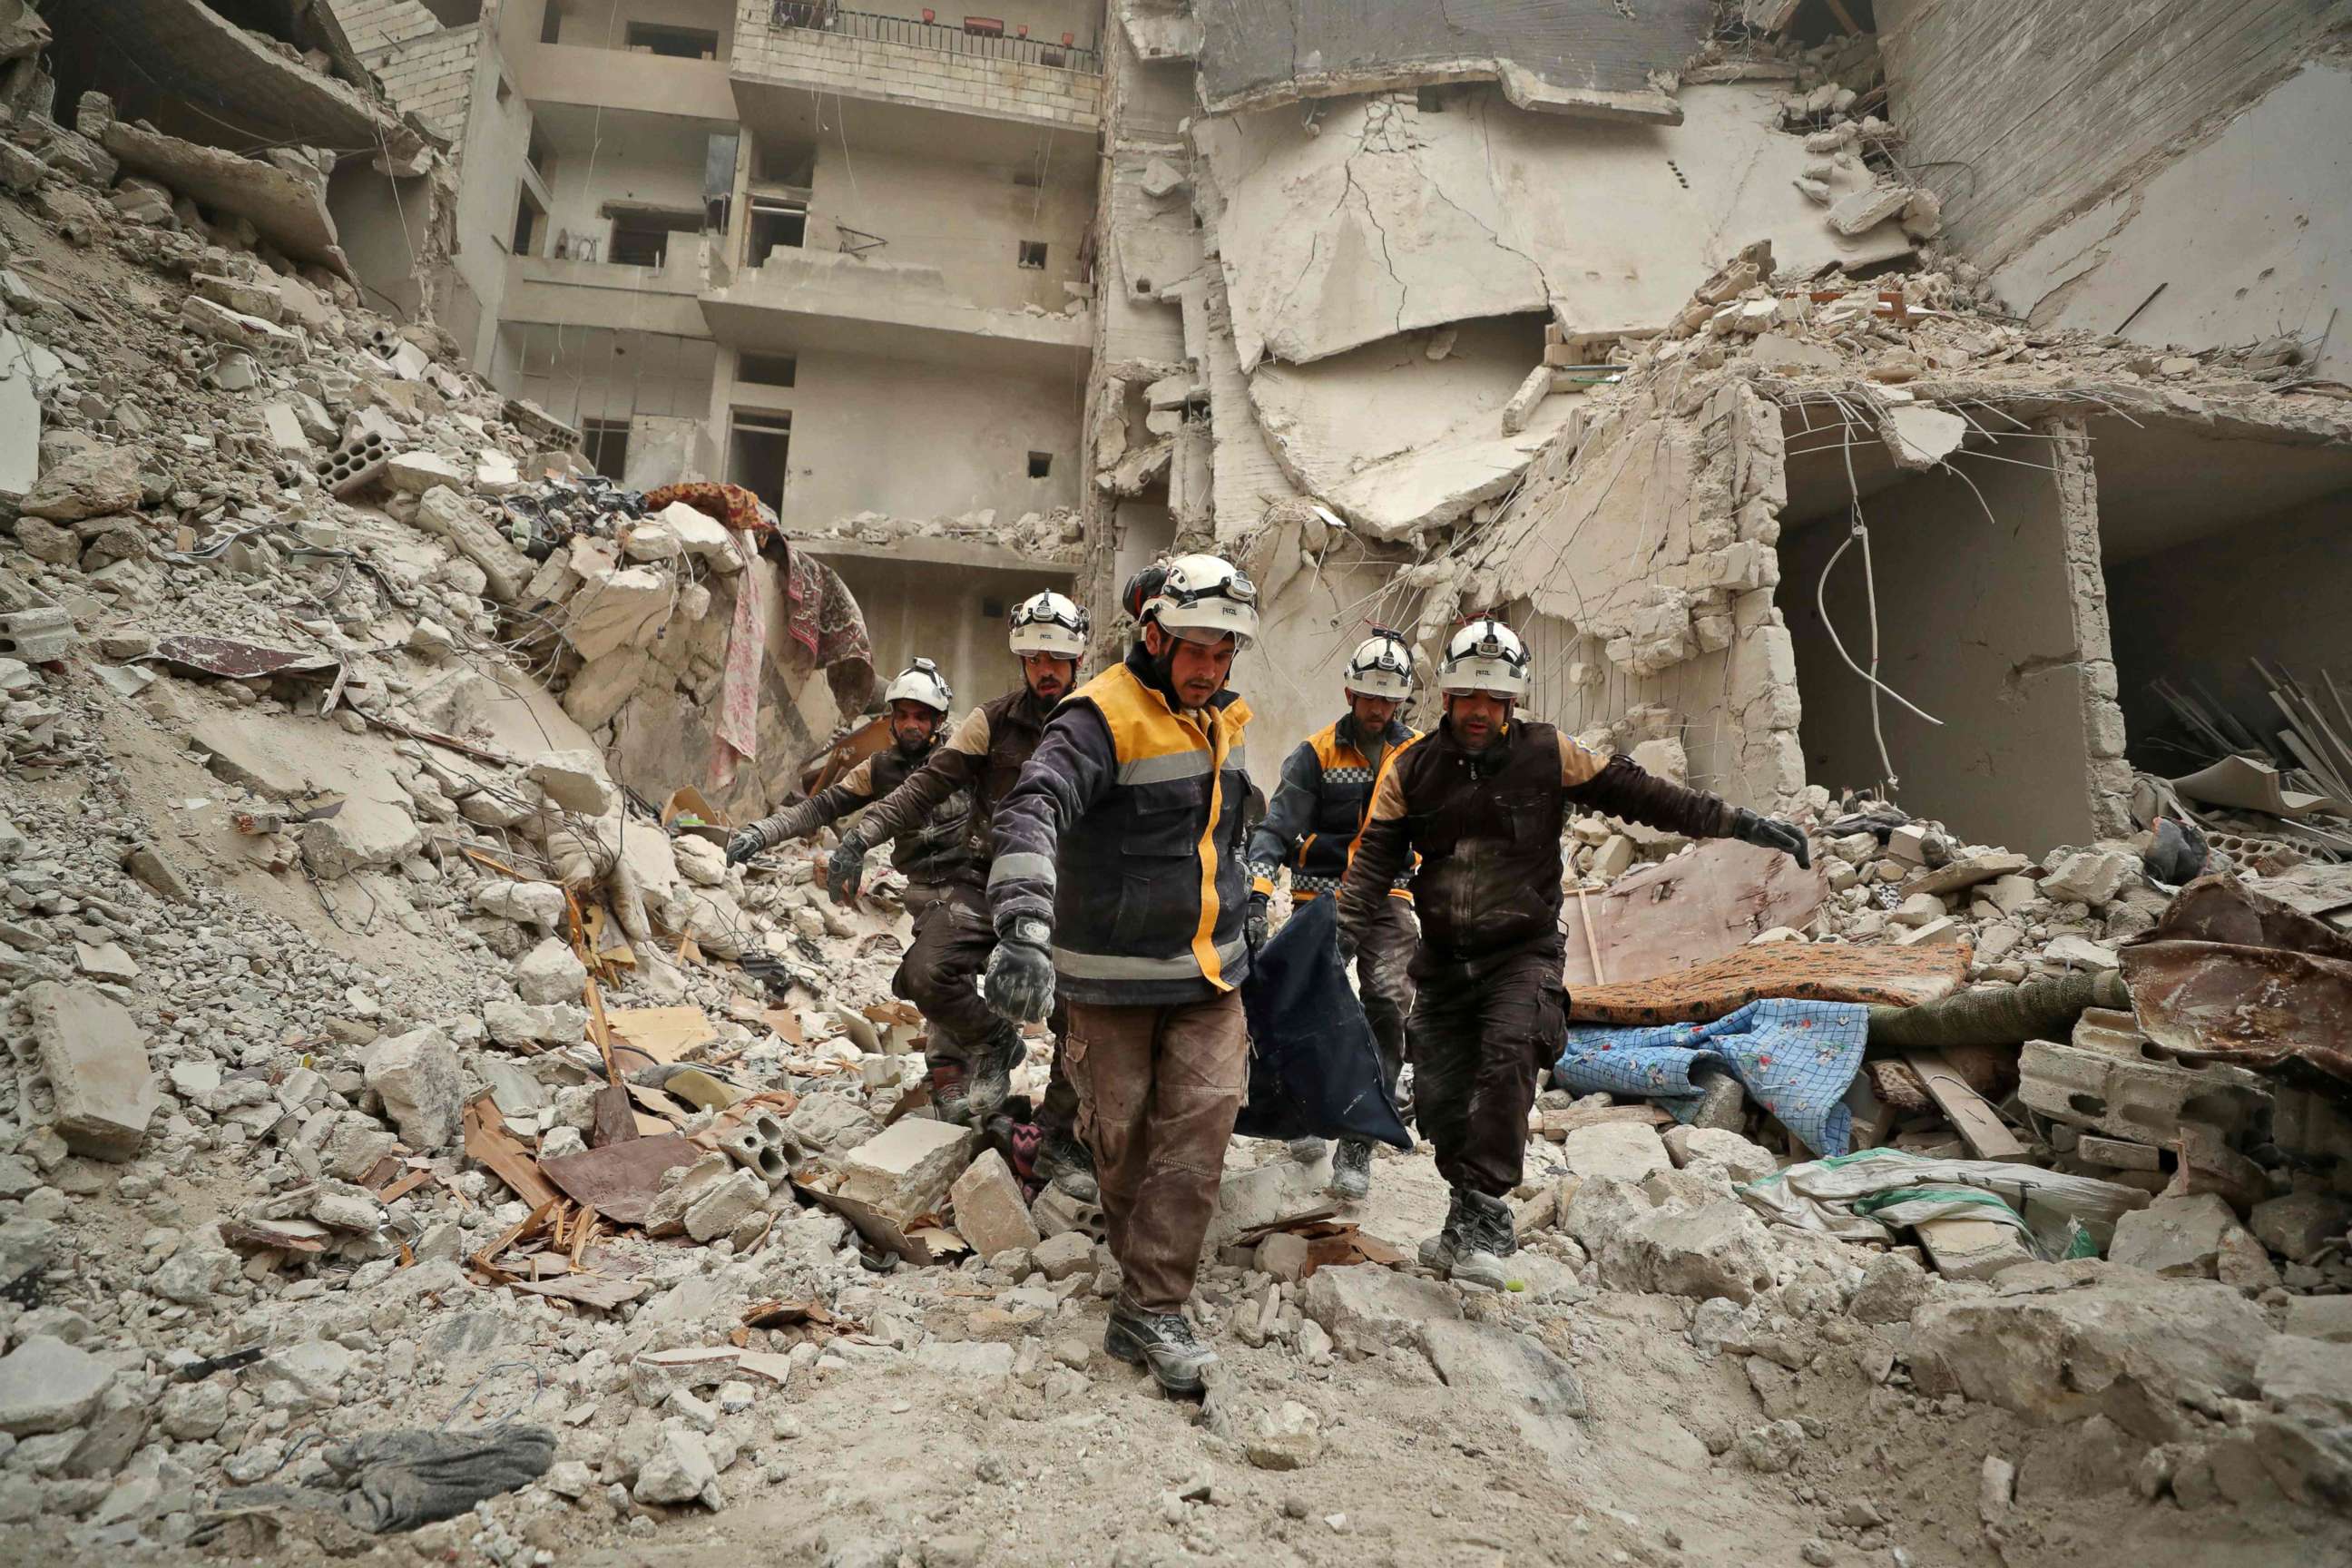 PHOTO: Rescue workers known as the White Helmets carry away the body of a victim found amidst the rubble of a building, hit during an air strike by pro-regime forces on the rebel-held town of Ariha, Idlib province, Syria, Feb. 5, 2020.